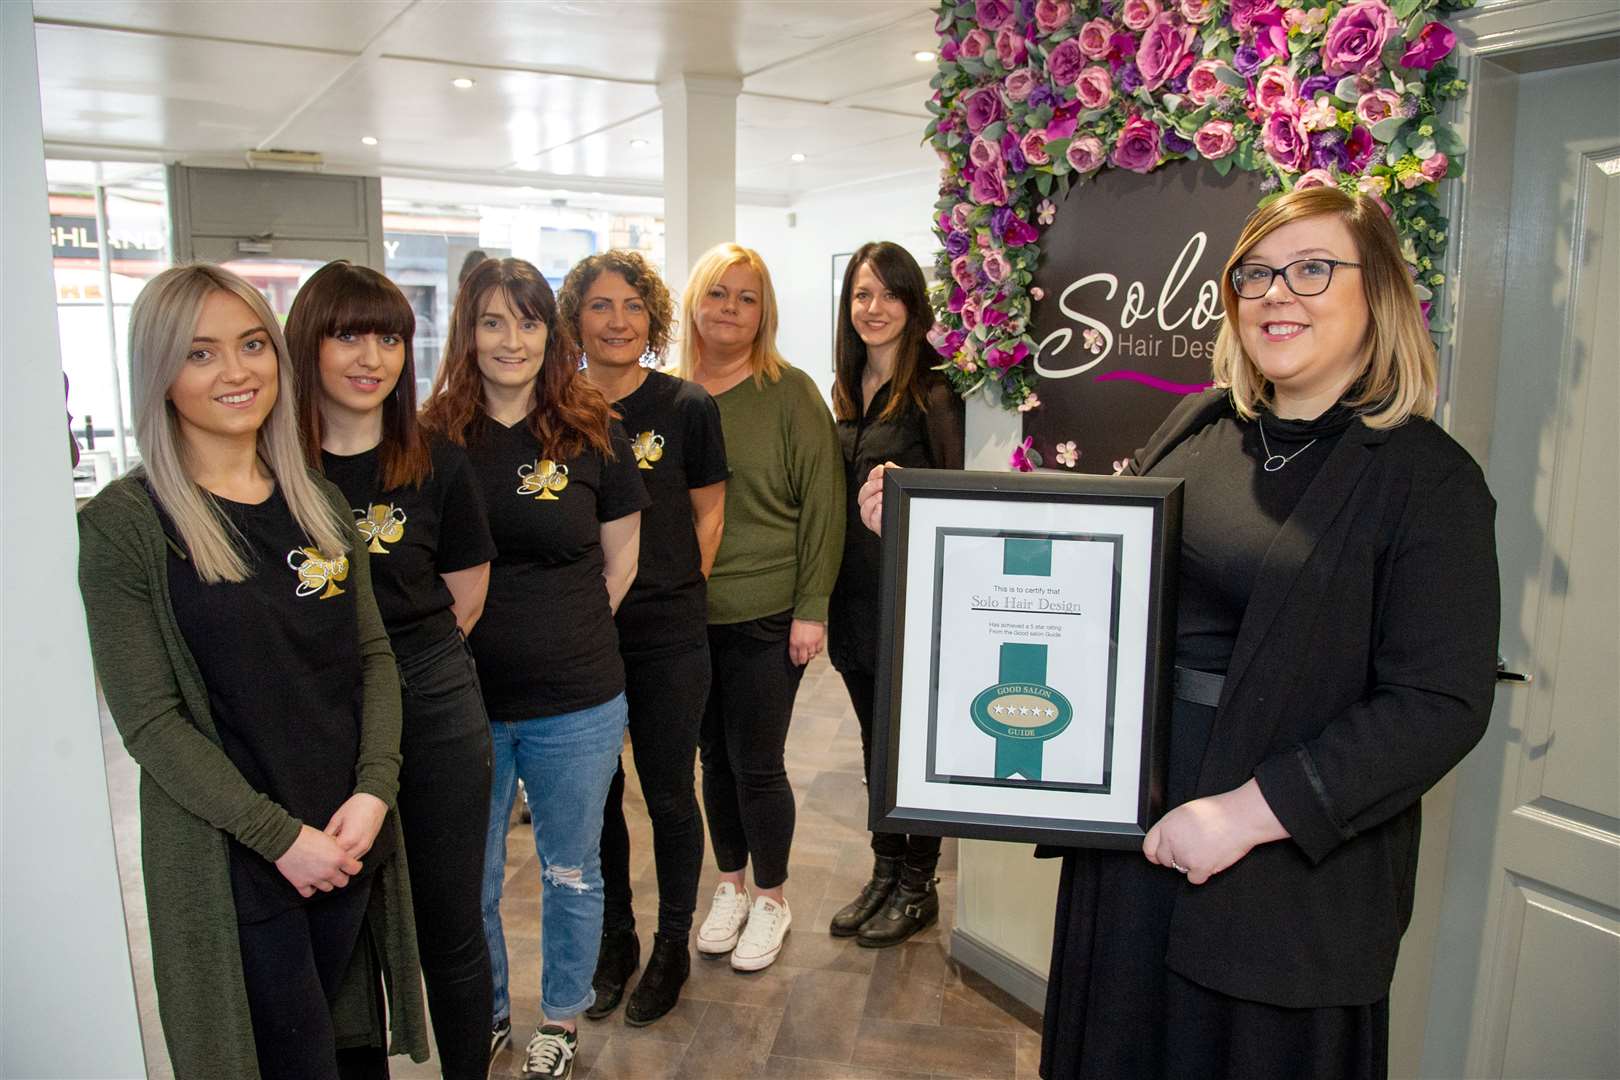 The Solo Hair Design team boasts five stars in the Good Salon Guide.  ..Owner Lisa Lawrence with staff - left to right - Lisa Piper, Lauren MacDonald, Natalie Gilchrist, Wendy Davidson, Joanne Hair and Dannielle Davies.  ..Photo: Daniel Forsyth..